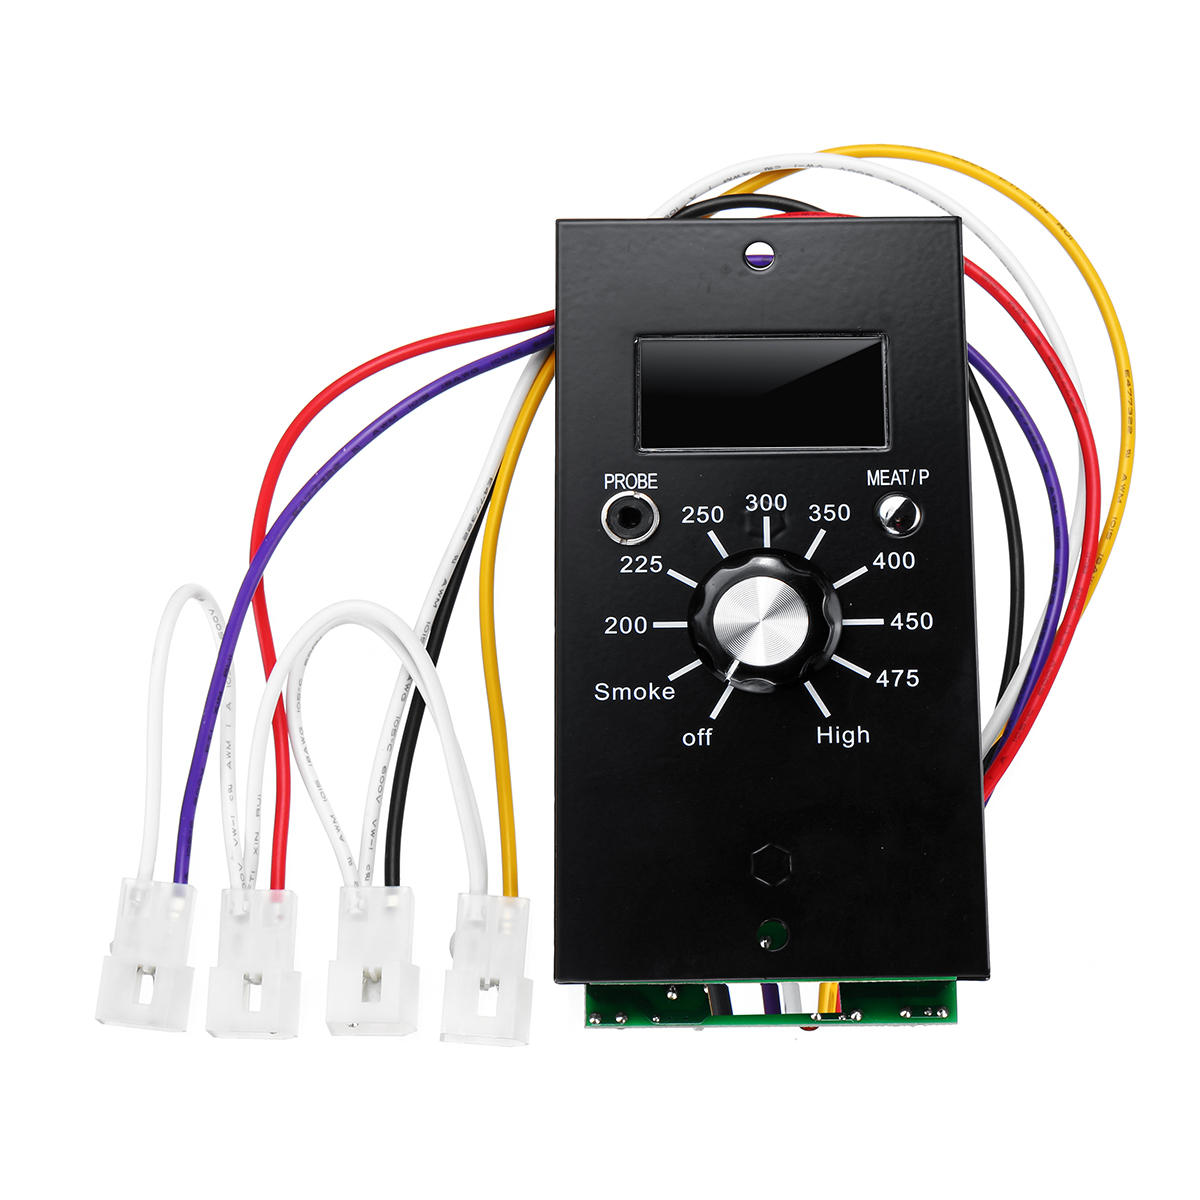 Digital Thermostat Control Board For Pit Boss Wood Pellet Grills For